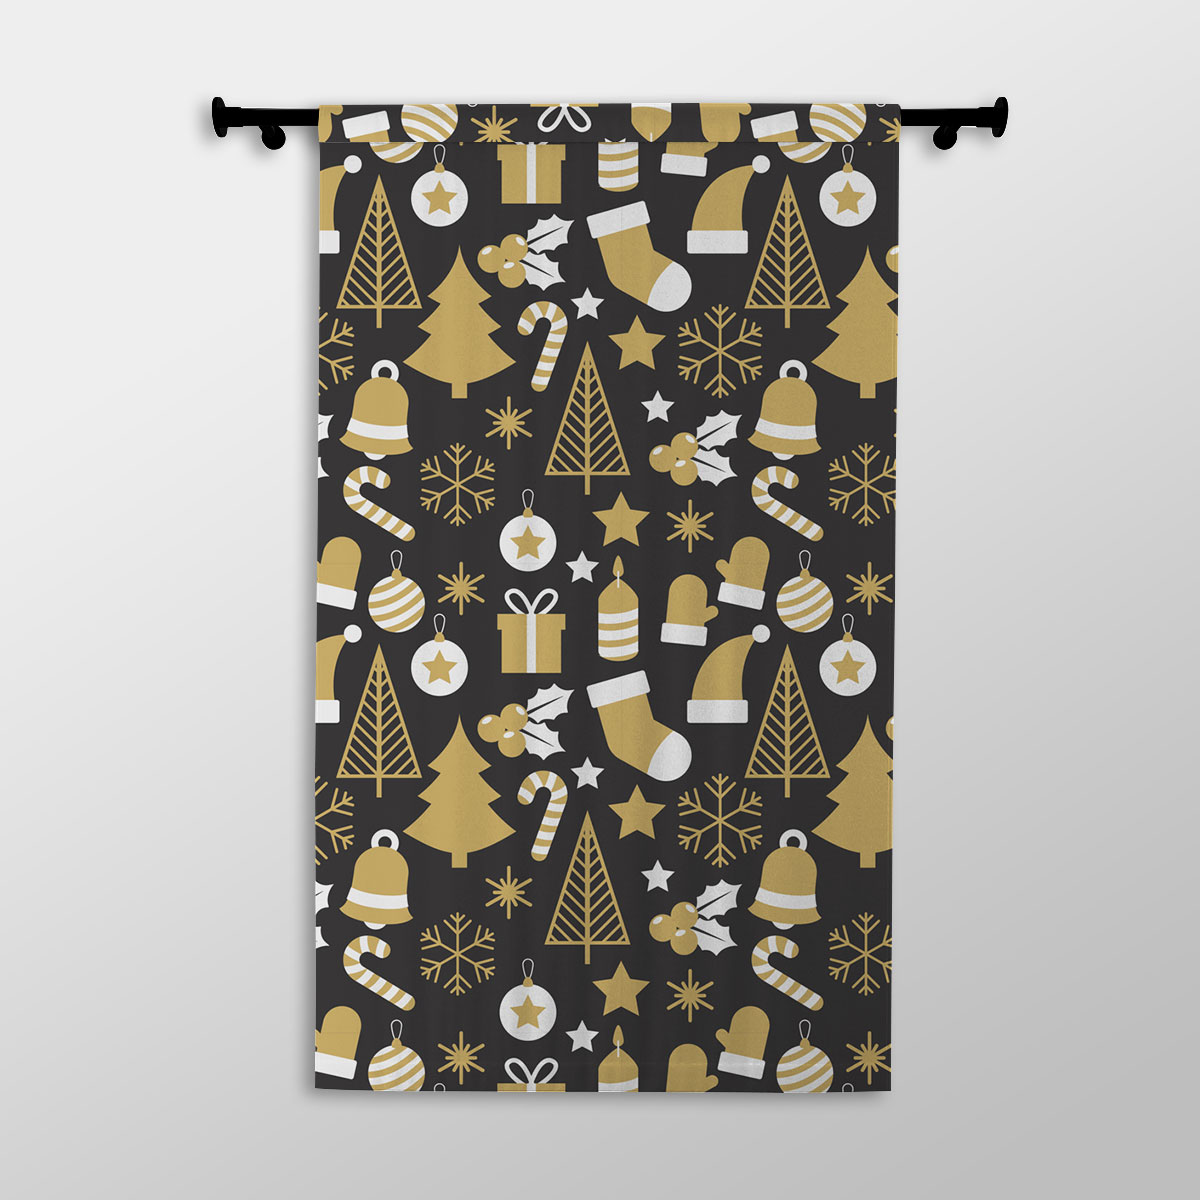 White And Gold Christmas Socks, Christmas Tree, Candy Cane On Black Background Printed Window Curtains